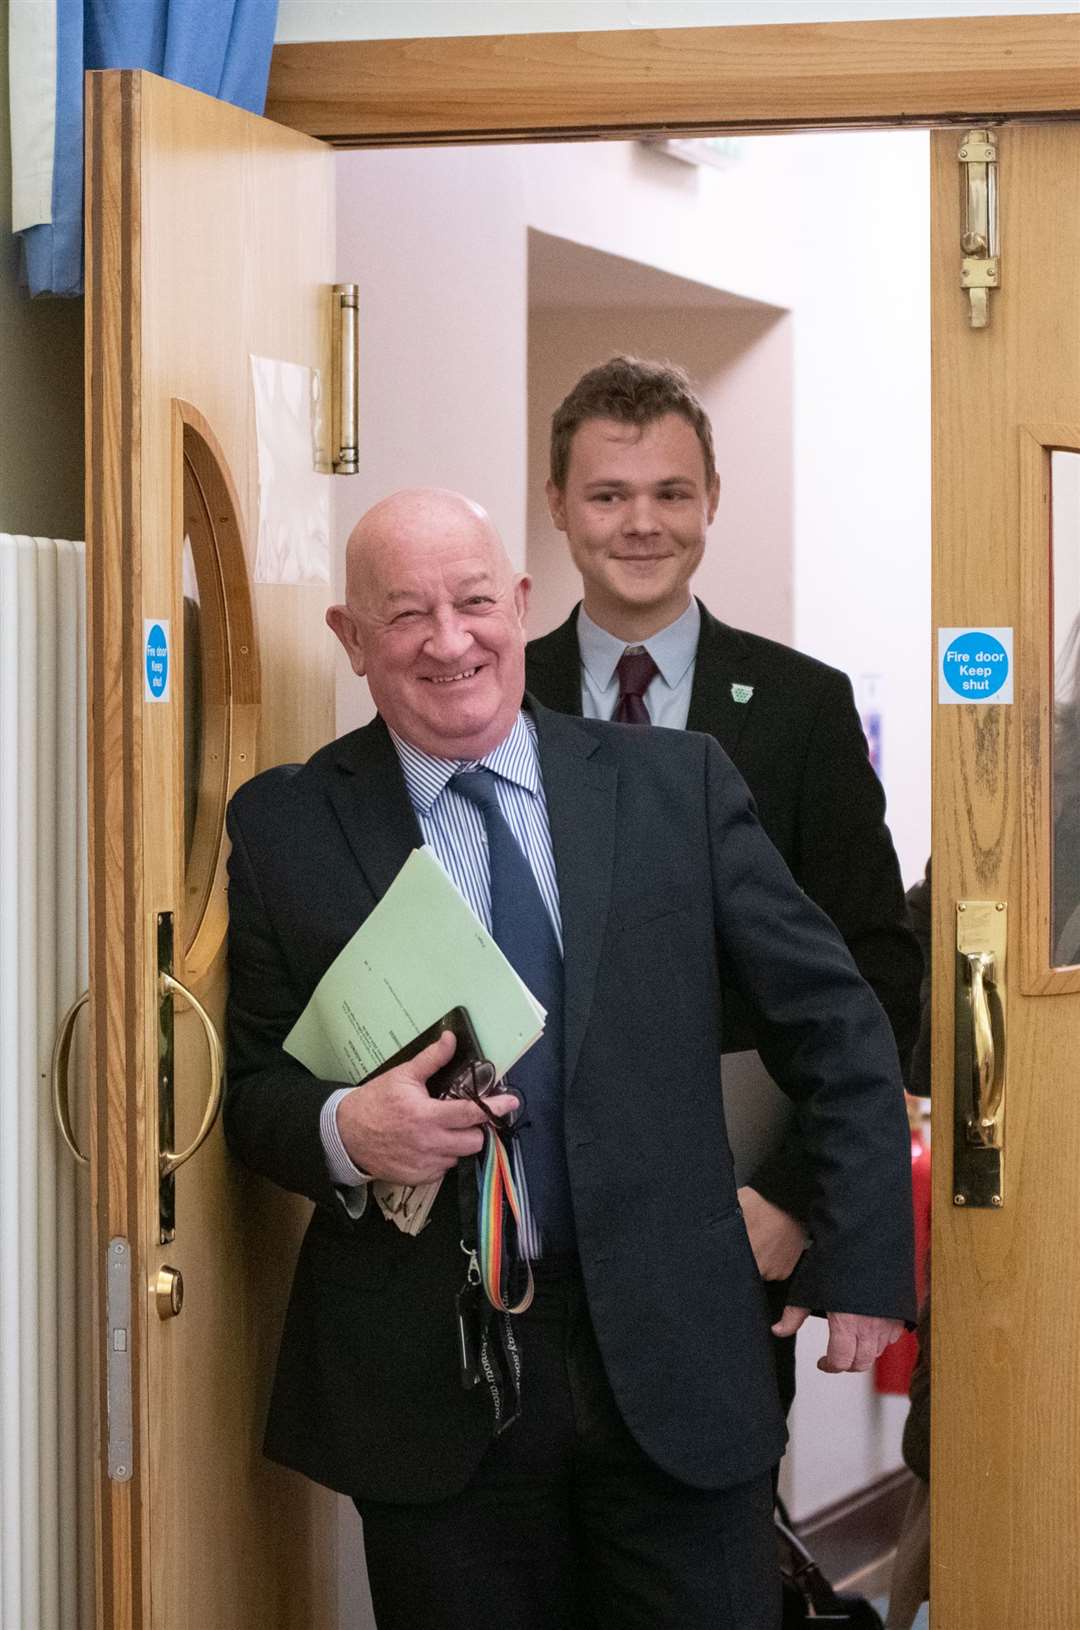 Independent councillor Derek Ross and his Labour colleague Ben Williams entering the council chamber today. Picture: Daniel Forsyth.